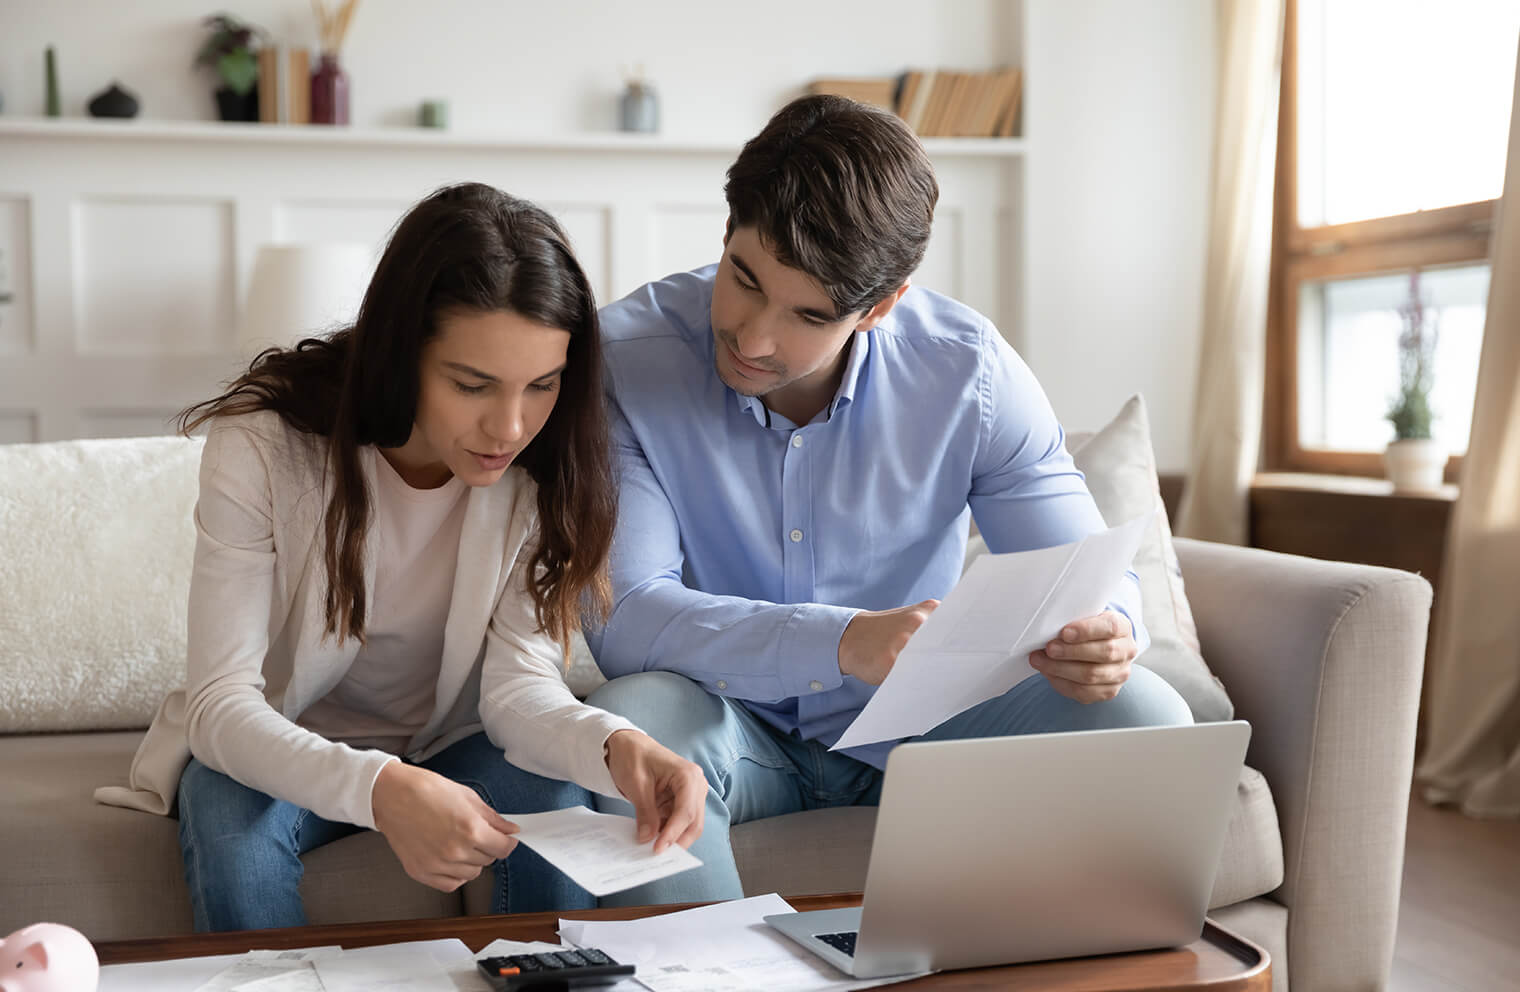 Picture of a young couple sitting on a couch while reviewing bills and receipts. There is a laptop, documents and a calculator on the desk.